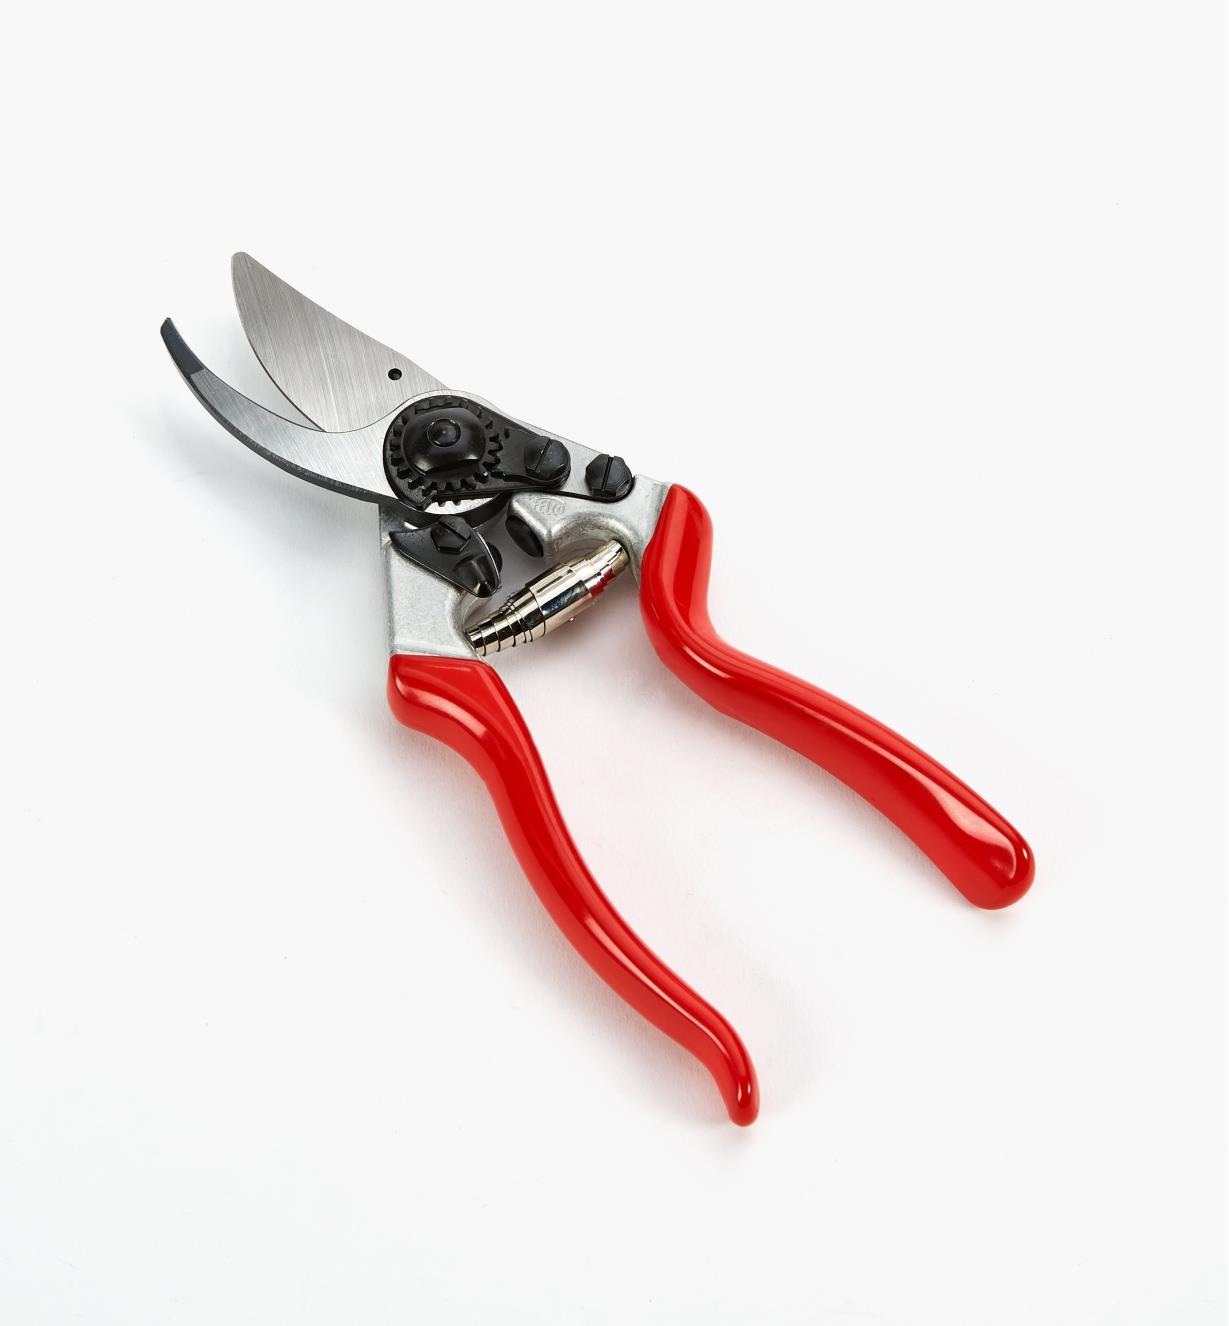 Felco #8 Hand Pruning Shears - Right Handed